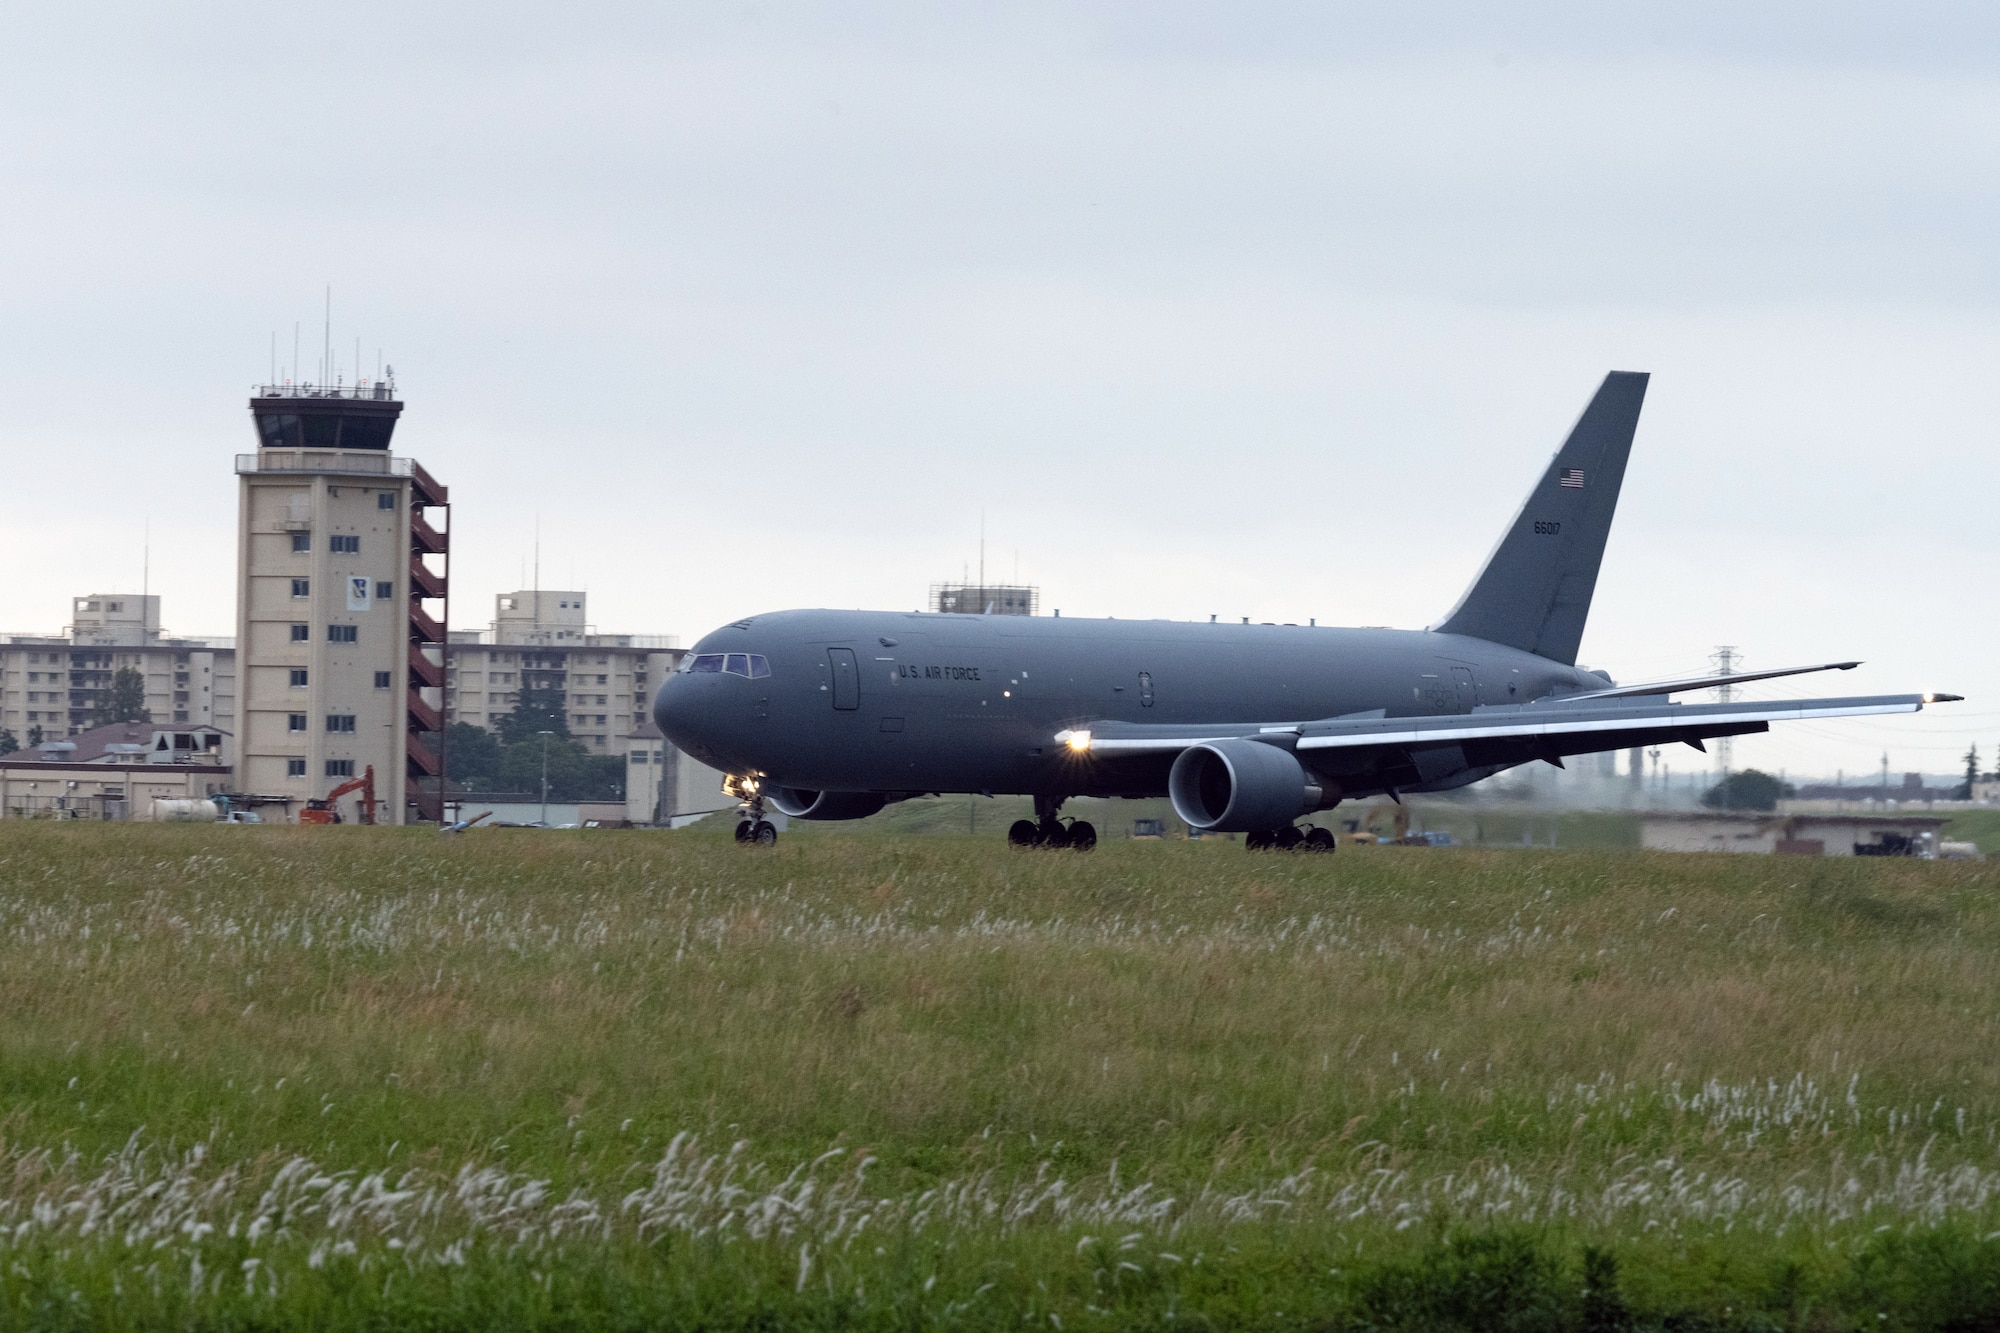 A KC-46A Pegasus from McConnell Air Force Base, Kansas, touches down on the runway June 8, 2022, at Yokota Air Base, Japan. The Pegasus is participating in Air Mobility Command’s Employment Concept Exercise 22-06 and provided air refueling operations to the Indo-Pacific Theater. The exercise focused on deployed integration of total force and joint training in a multi-domain environment to build real-world proficiency and readiness. (U.S. Air Force photo by Master Sgt. John Gordinier)